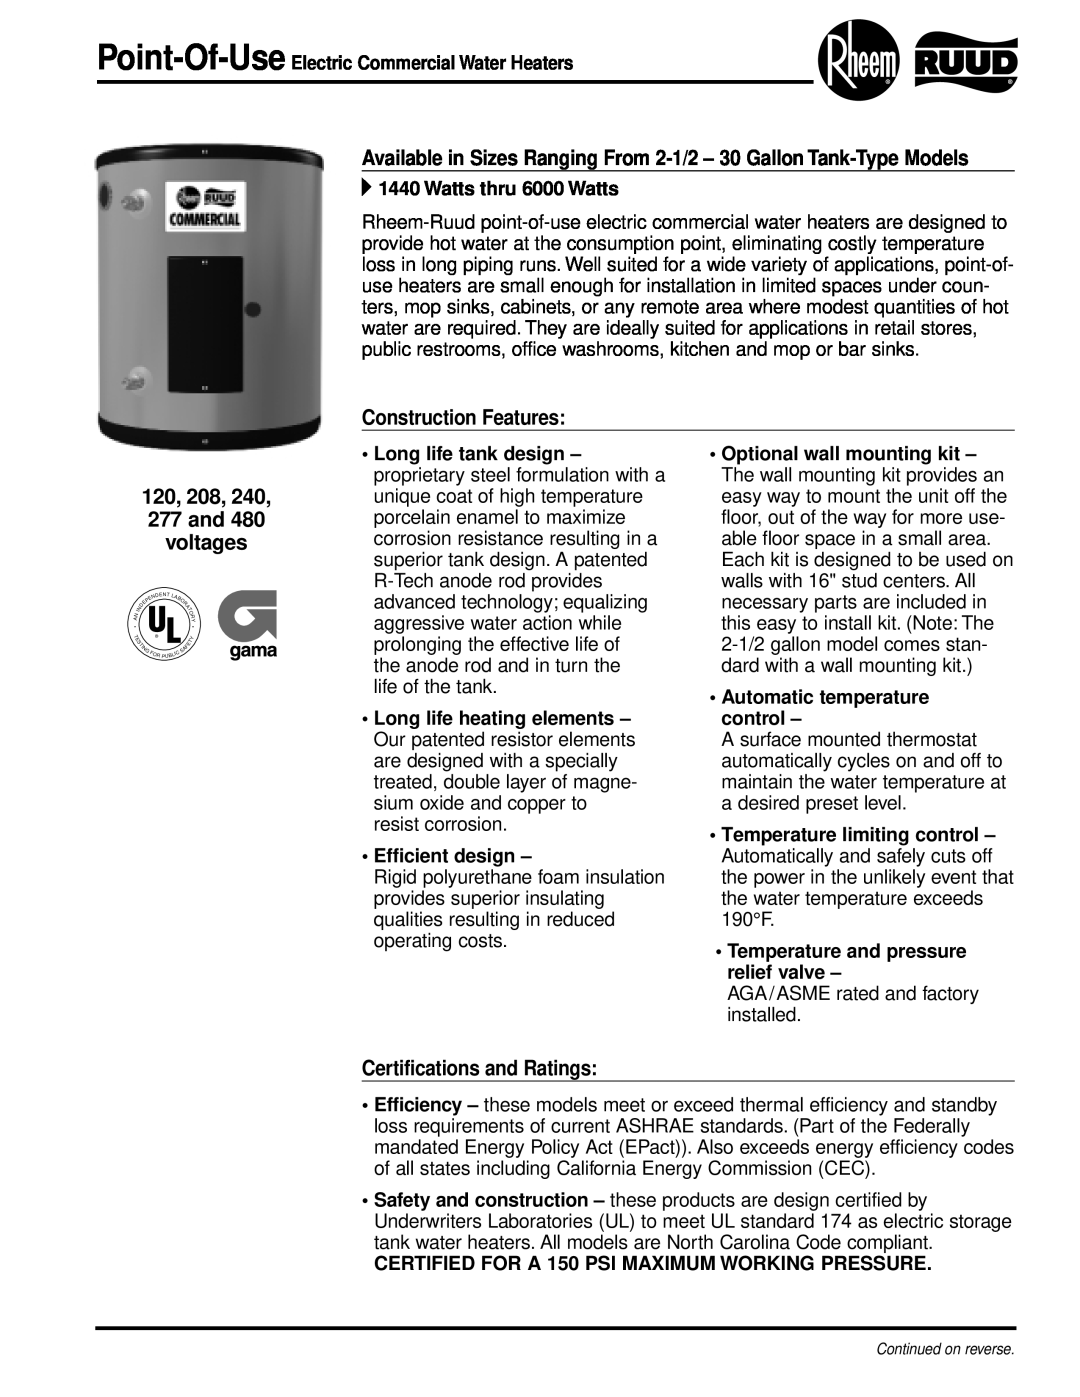 Rheem 277, 480, 208, 240 manual Available in Sizes Ranging From 2-1/2 - 30 Gallon Tank-Type Models, Construction Features 